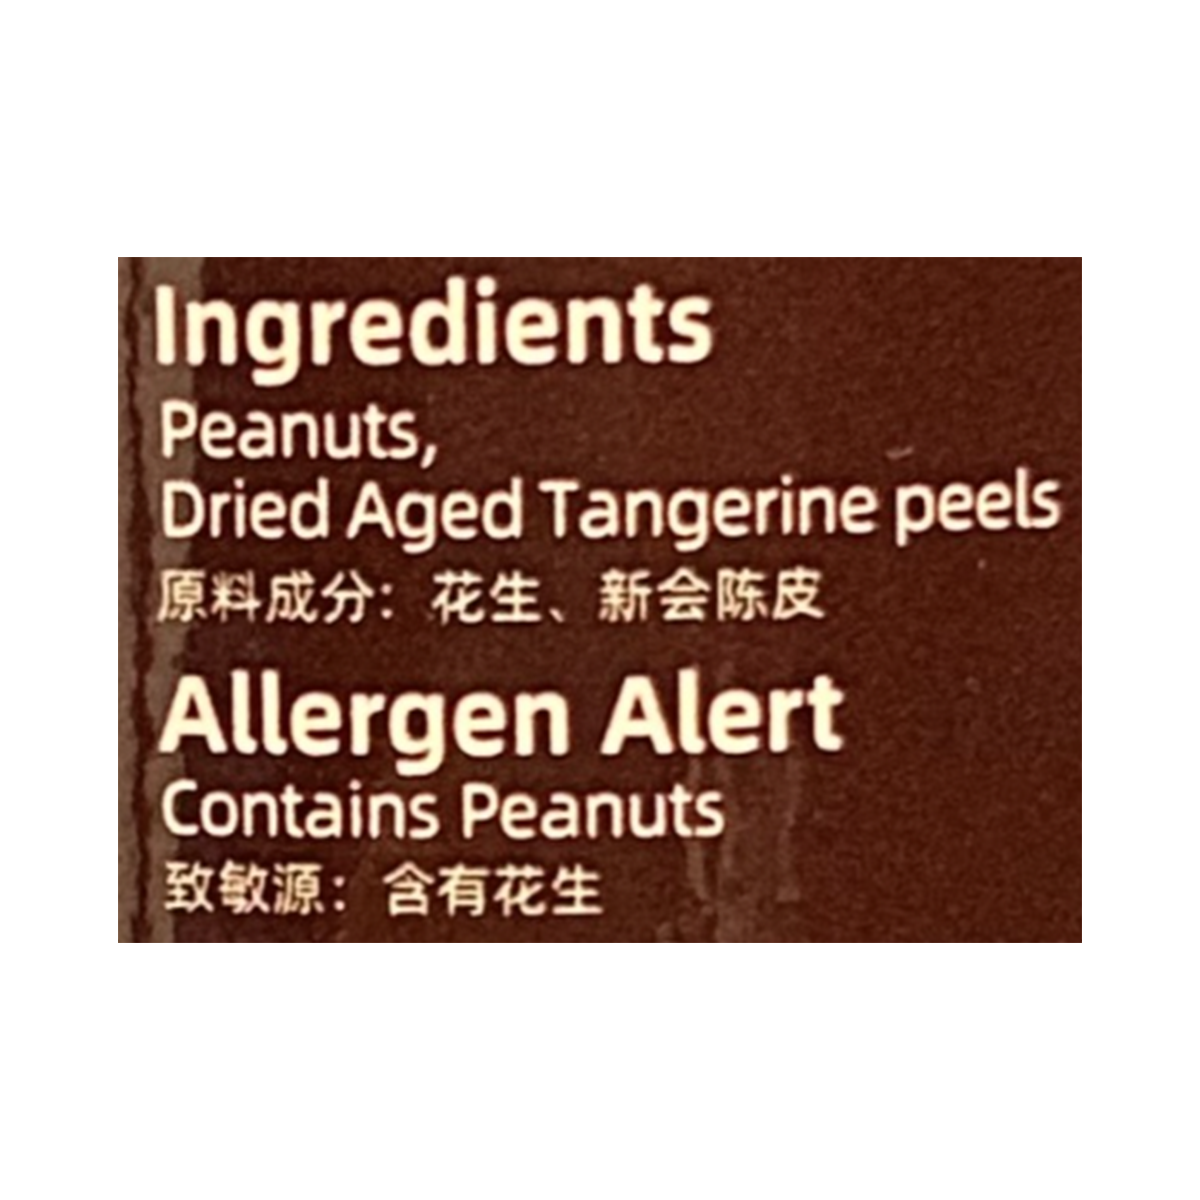 ChenPiCun Dried Aged Tangerine Peel Peanuts 250 g Ready to Eat Hua Sheng